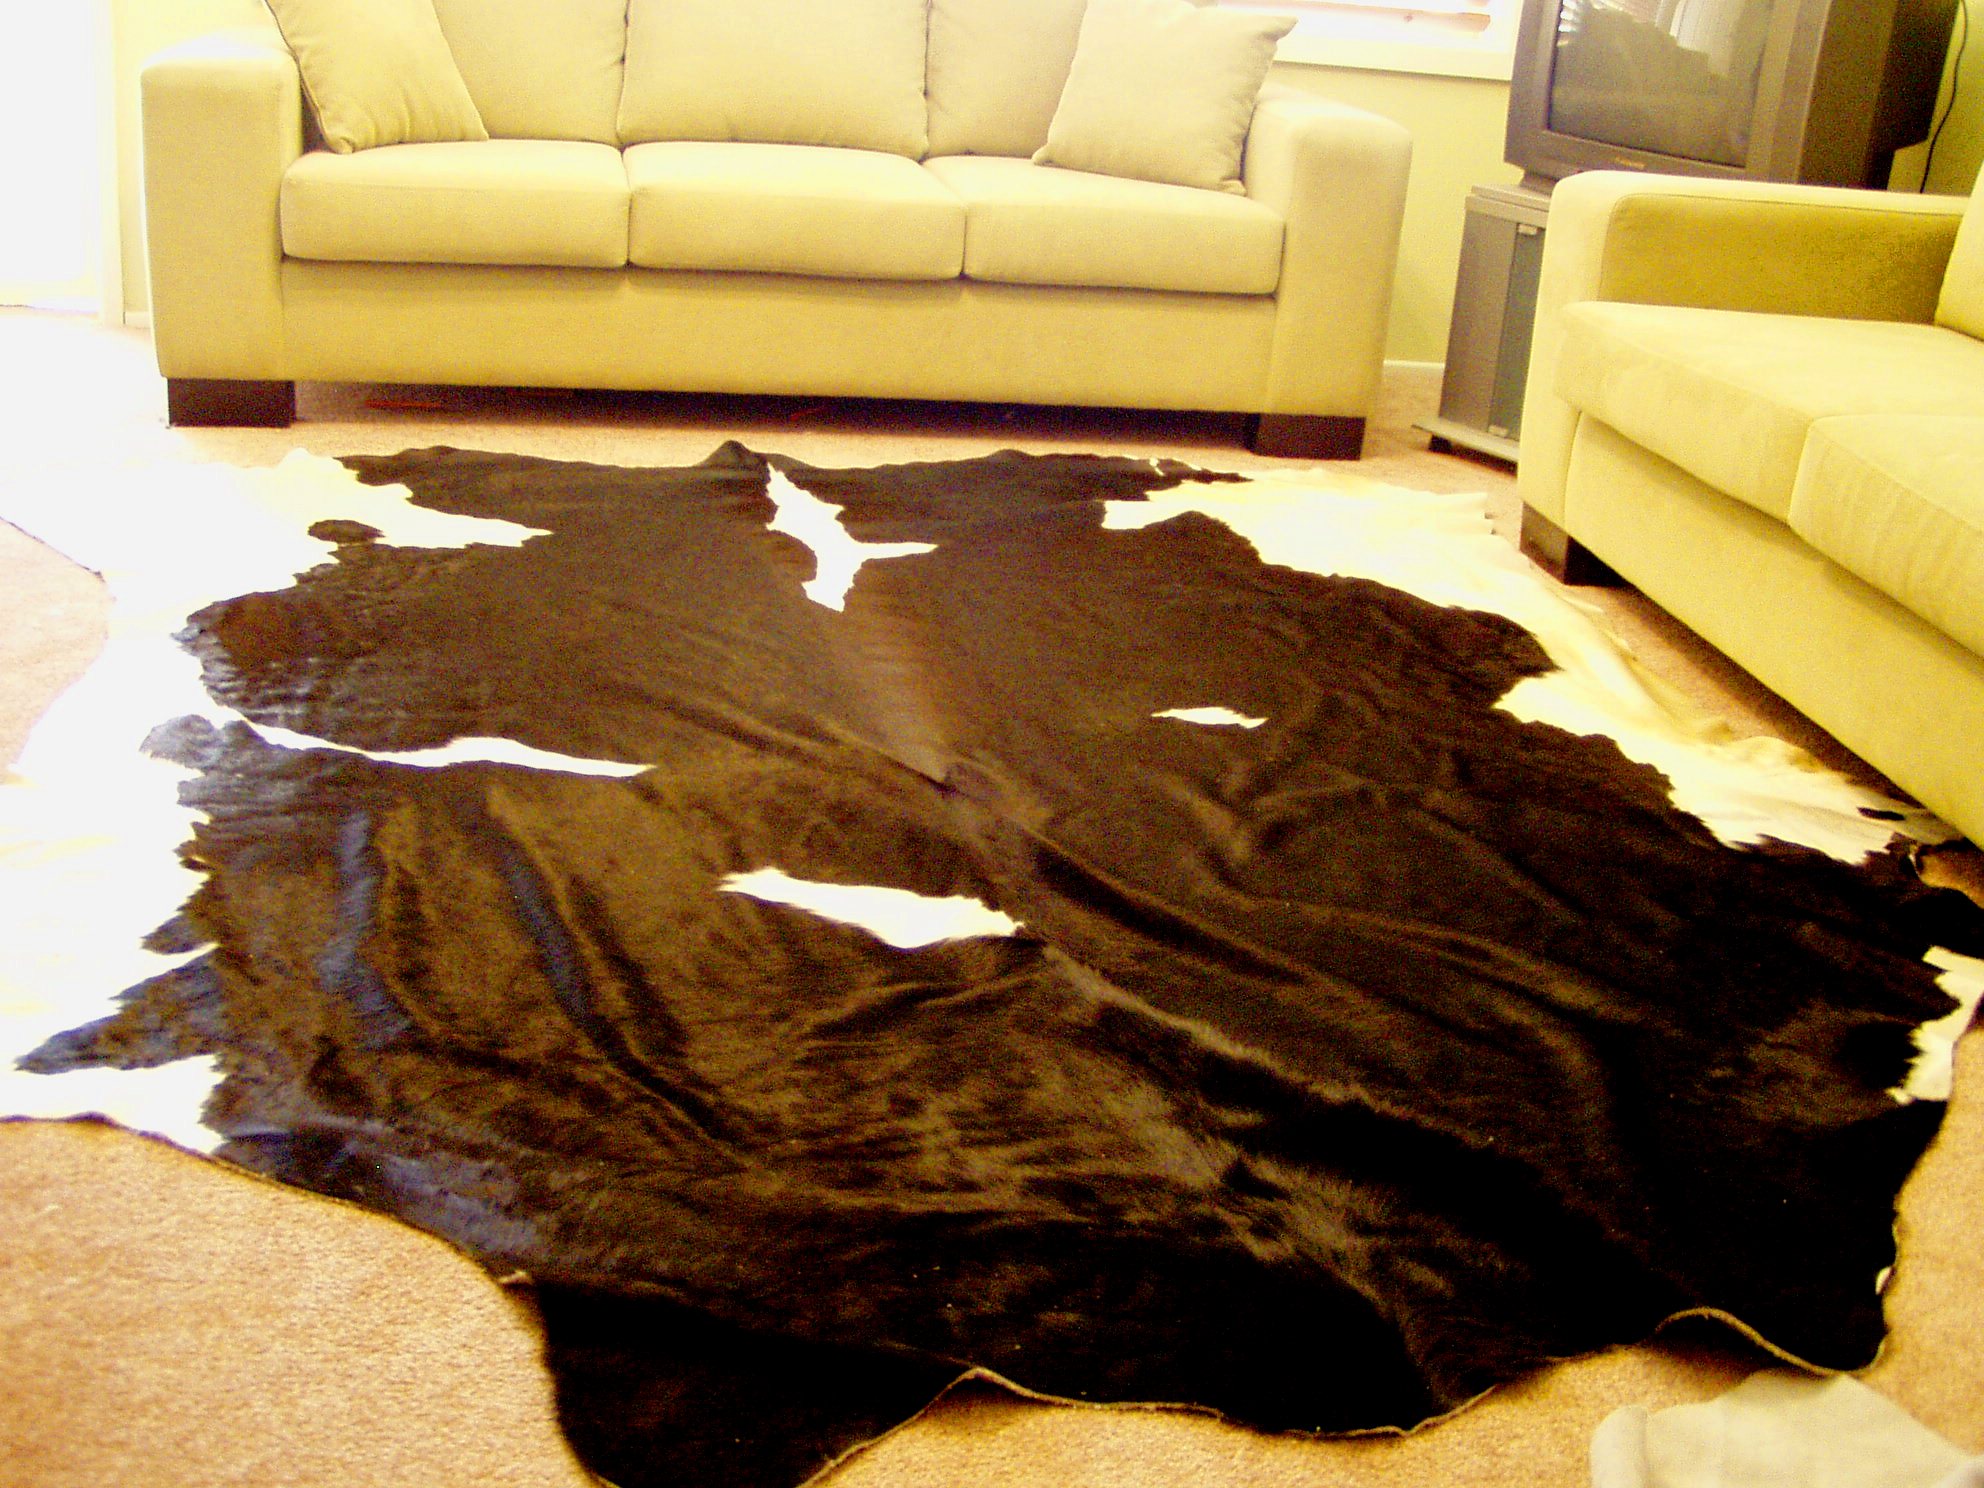 DELUXE EXTRA LARGE BLACK AND WHITE COW HIDE RUG : $400